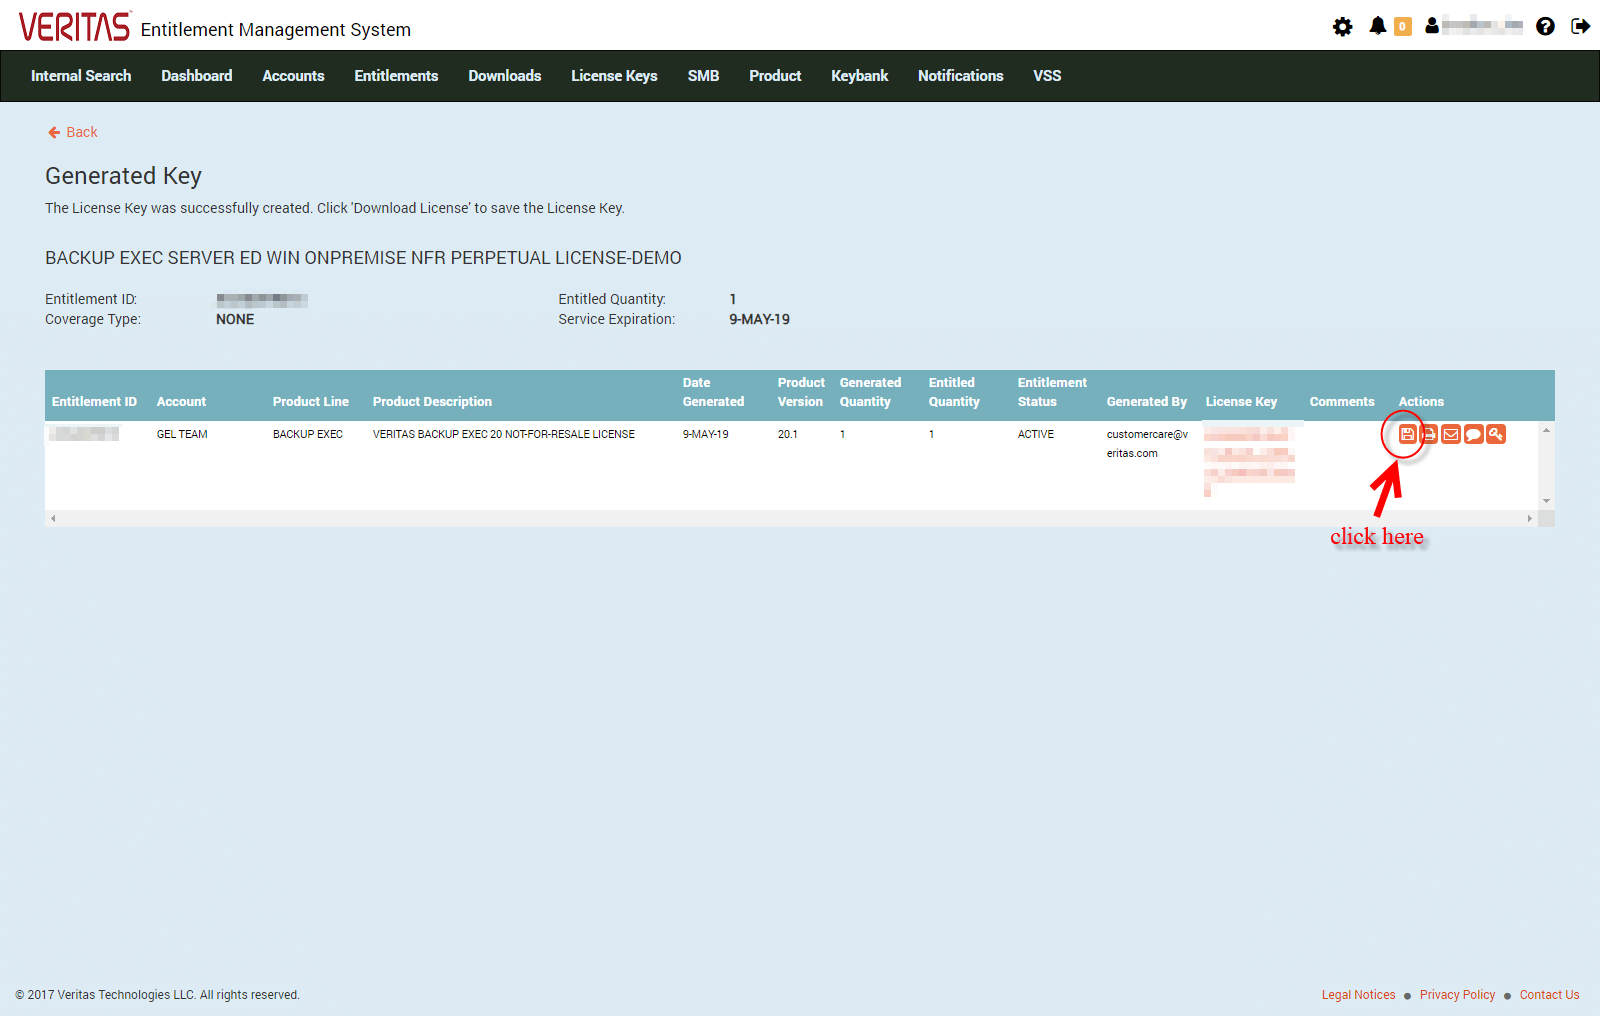 on the generated key page, click the save icon under the actions column on the right side of the page to download the license key file (.slf).